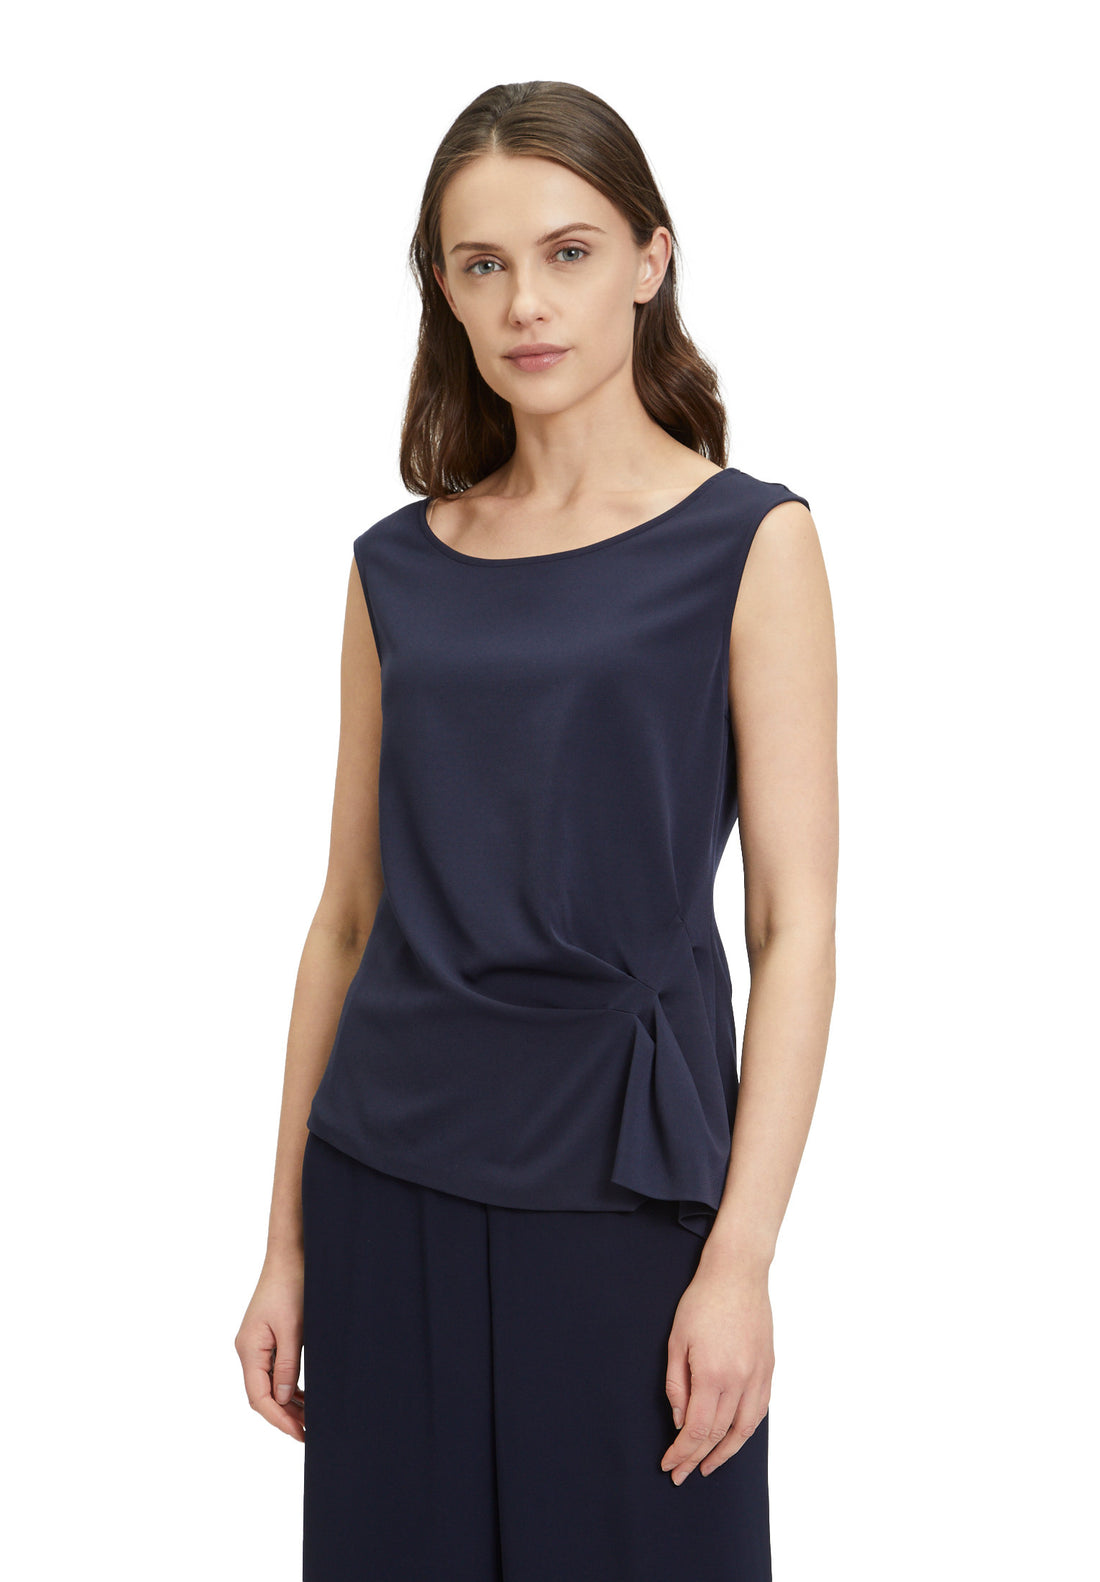 Sleeveless Top With Side Knot_4878 4589_8541_03